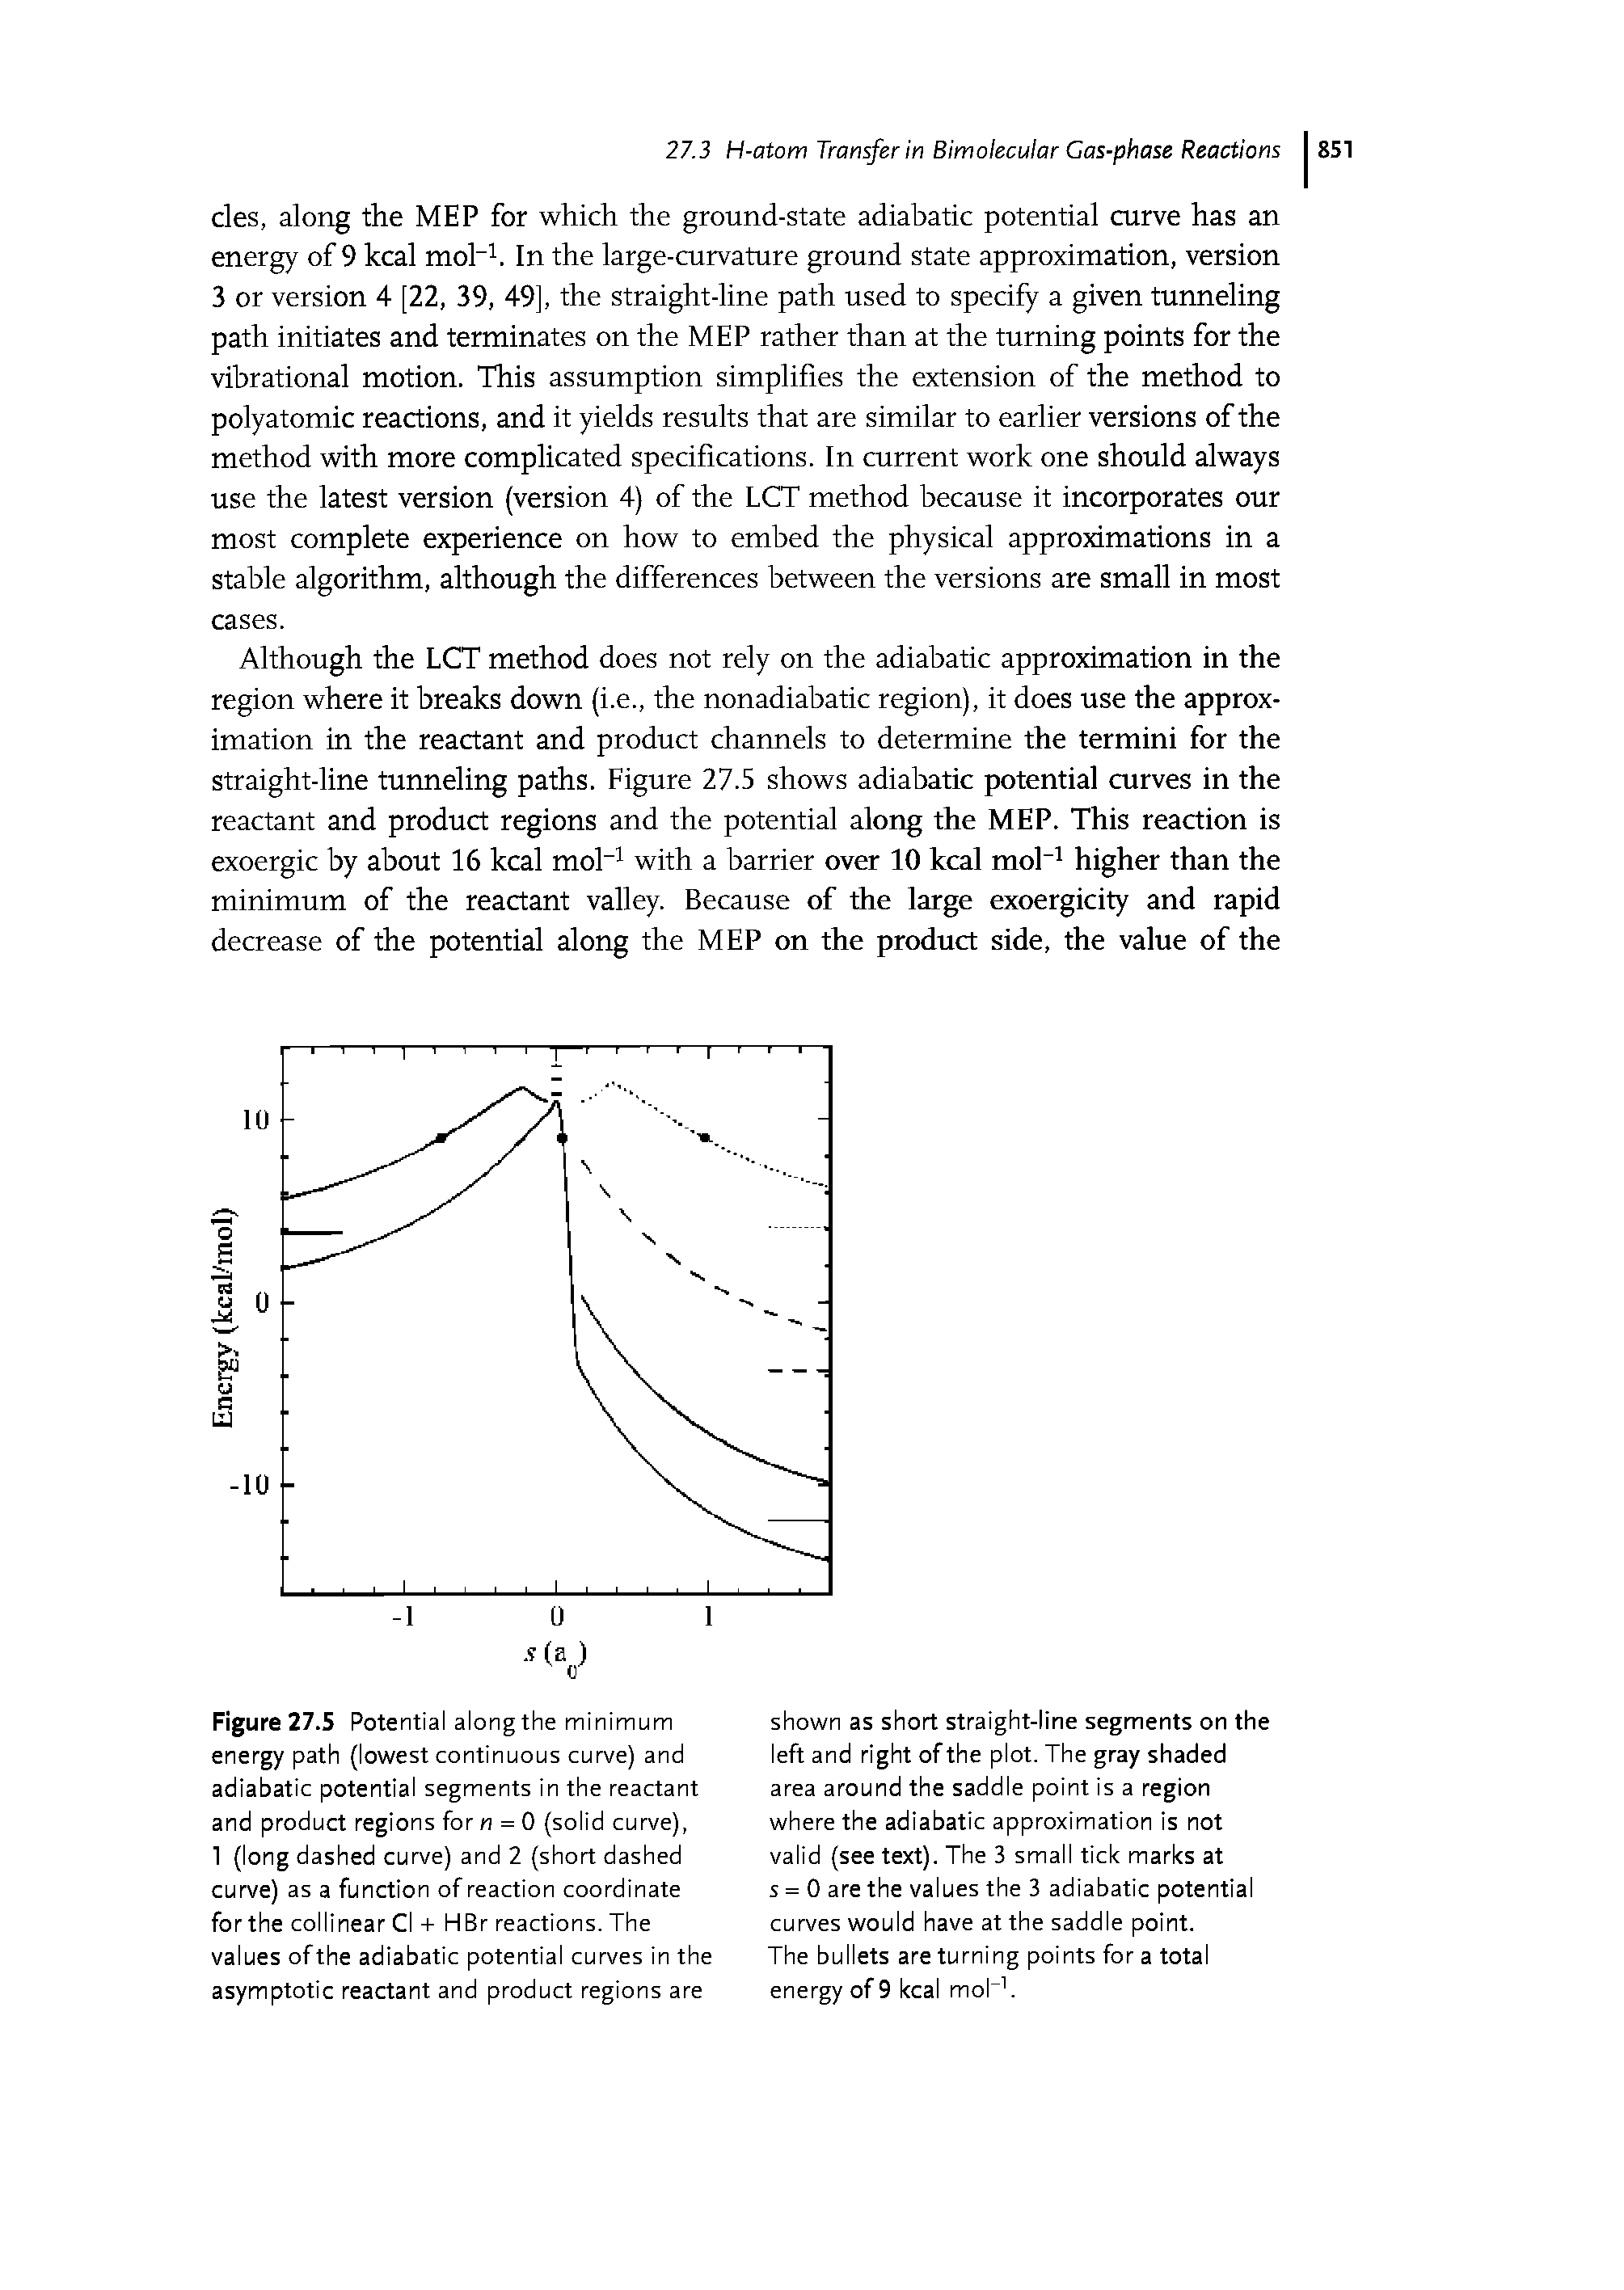 Figure 27.5 Potential along the minimum energy path (lowest continuous curve) and adiabatic potential segments in the reactant and product regions for = 0 (solid curve),...